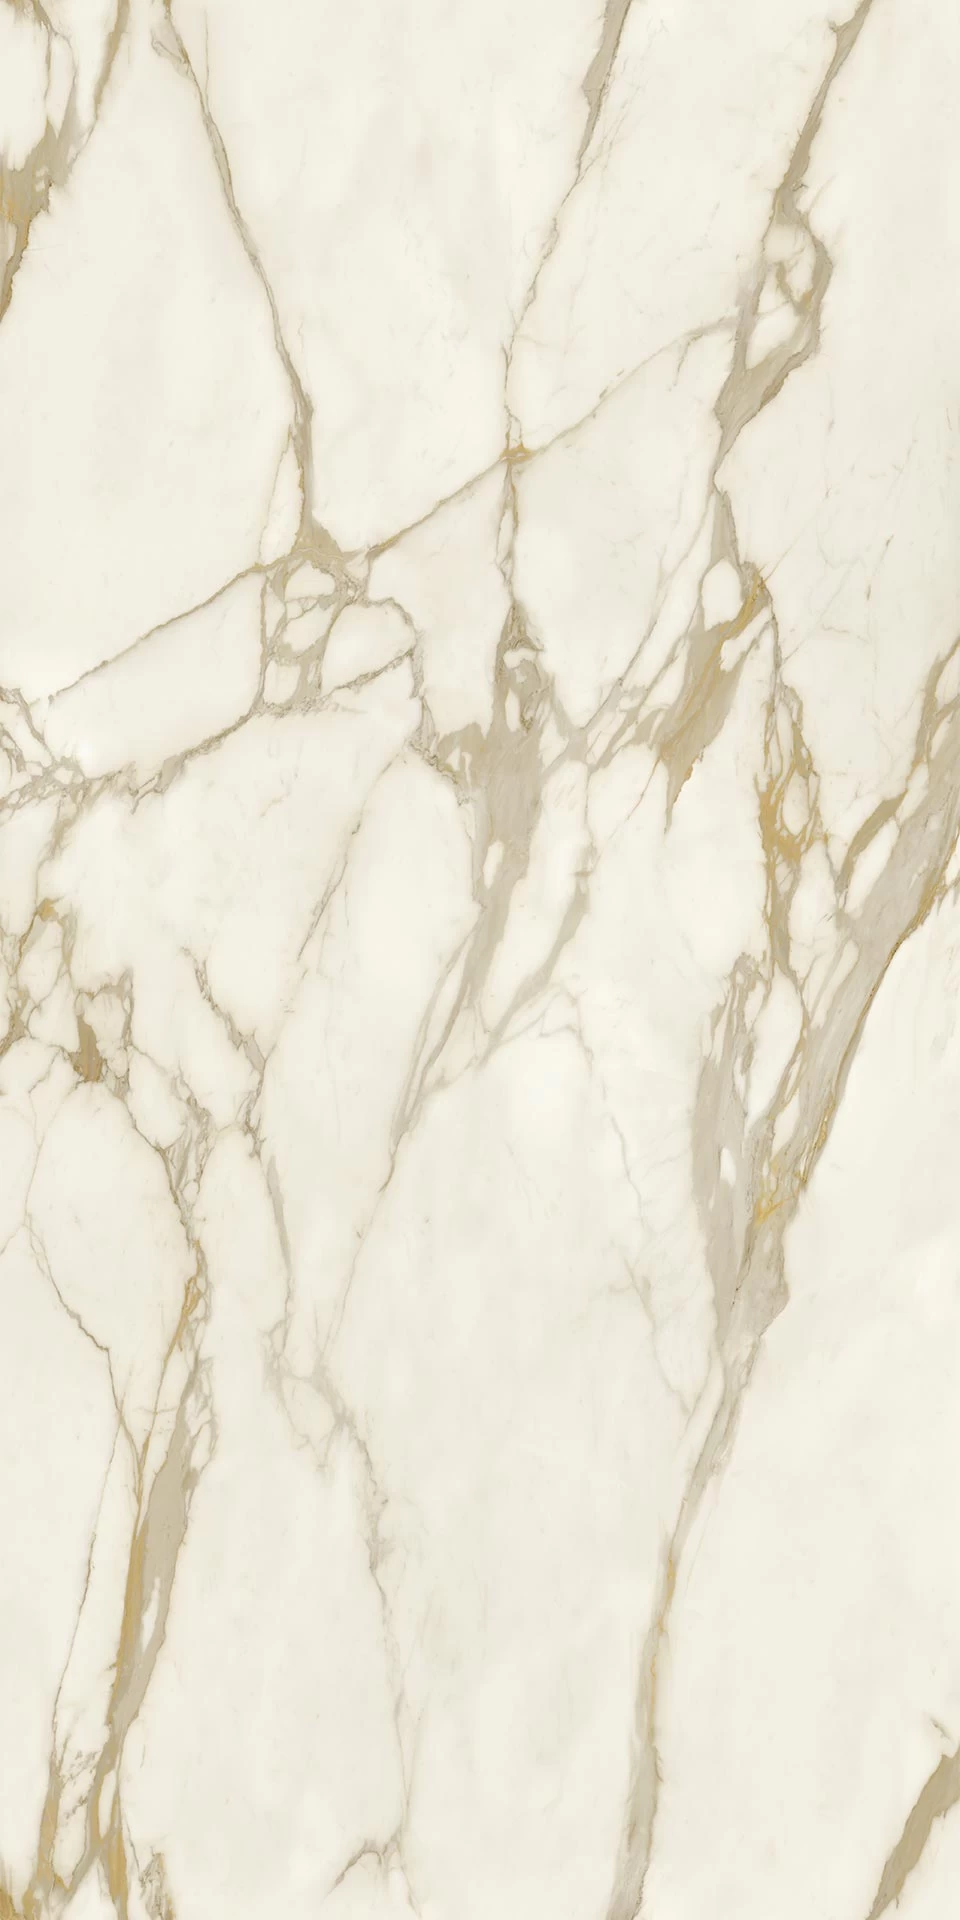 Calacatta Gold porcelain stoneware for high-end dining tables